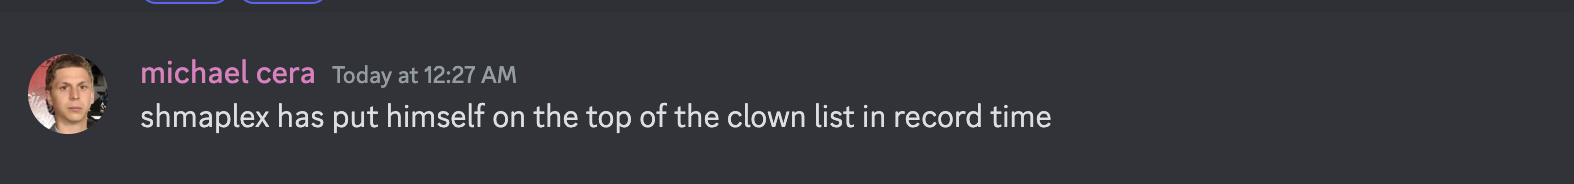 shmaplex has put himself on the top of the clown list in record time